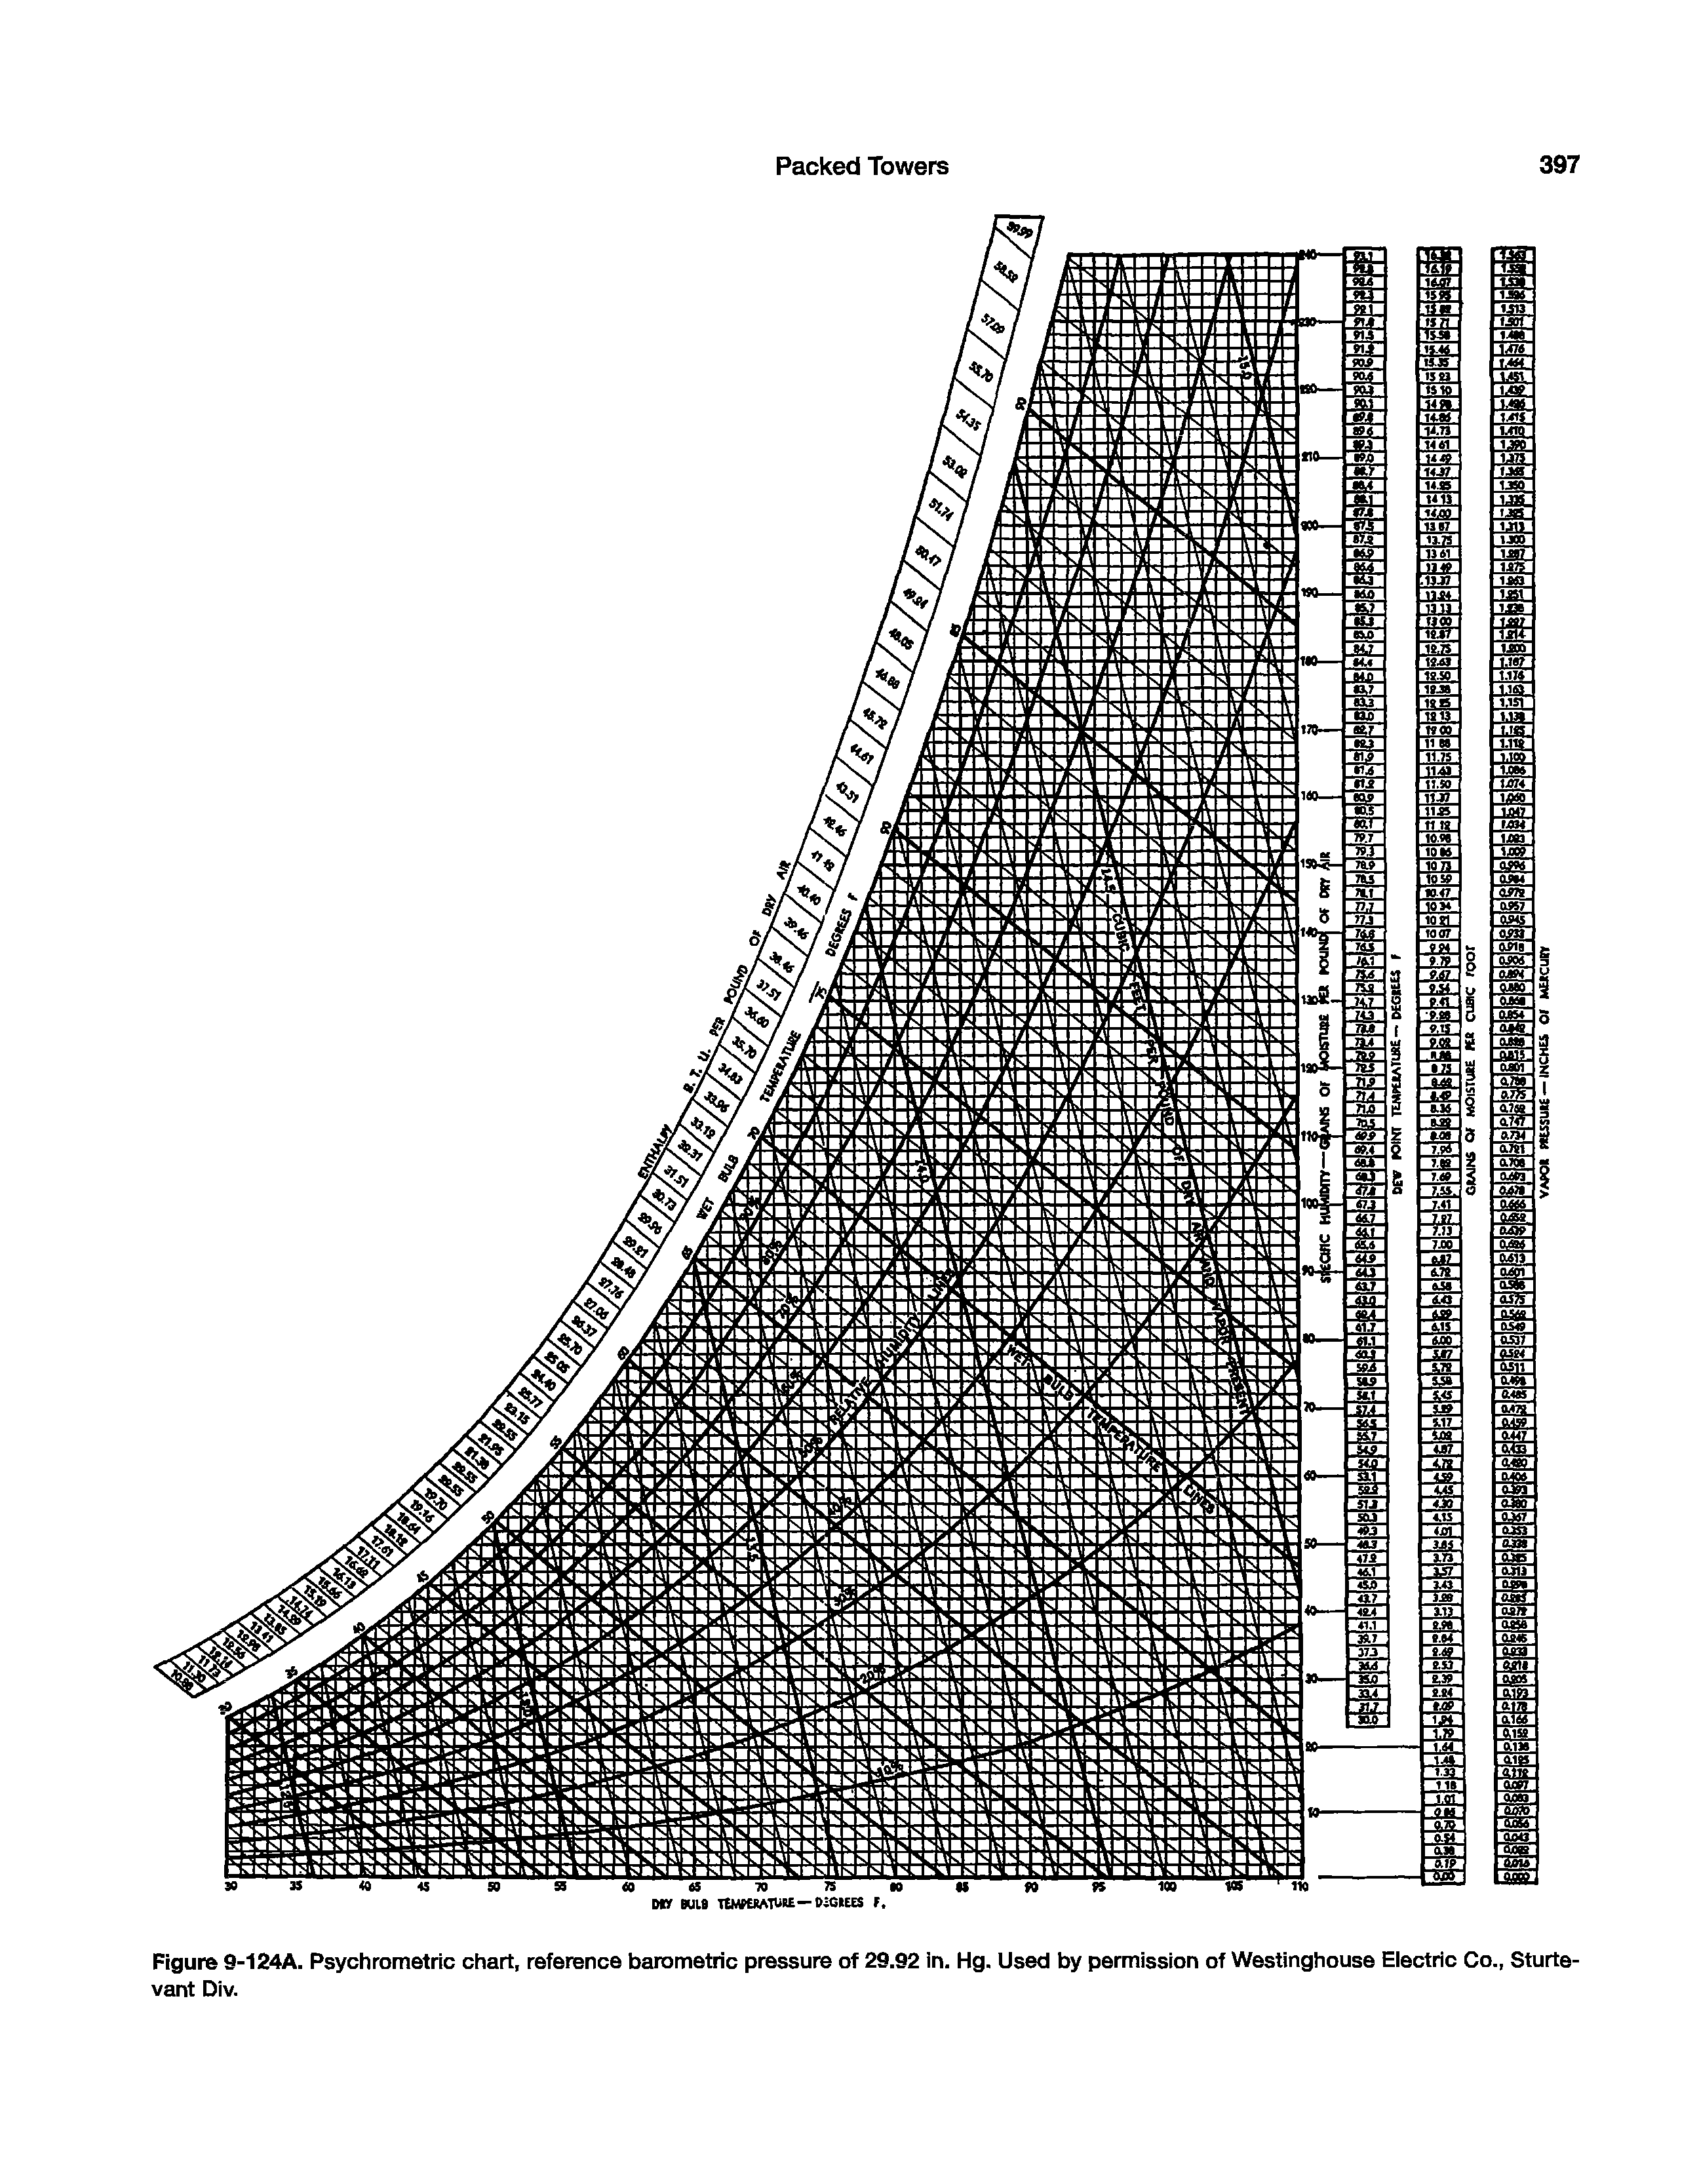 Figure 9-124A. Psychrometric chart, reference barometric pressure of 29.92 in. Hg. Used by permission of Westinghouse Eiectric Co., Sturte-vant Div.